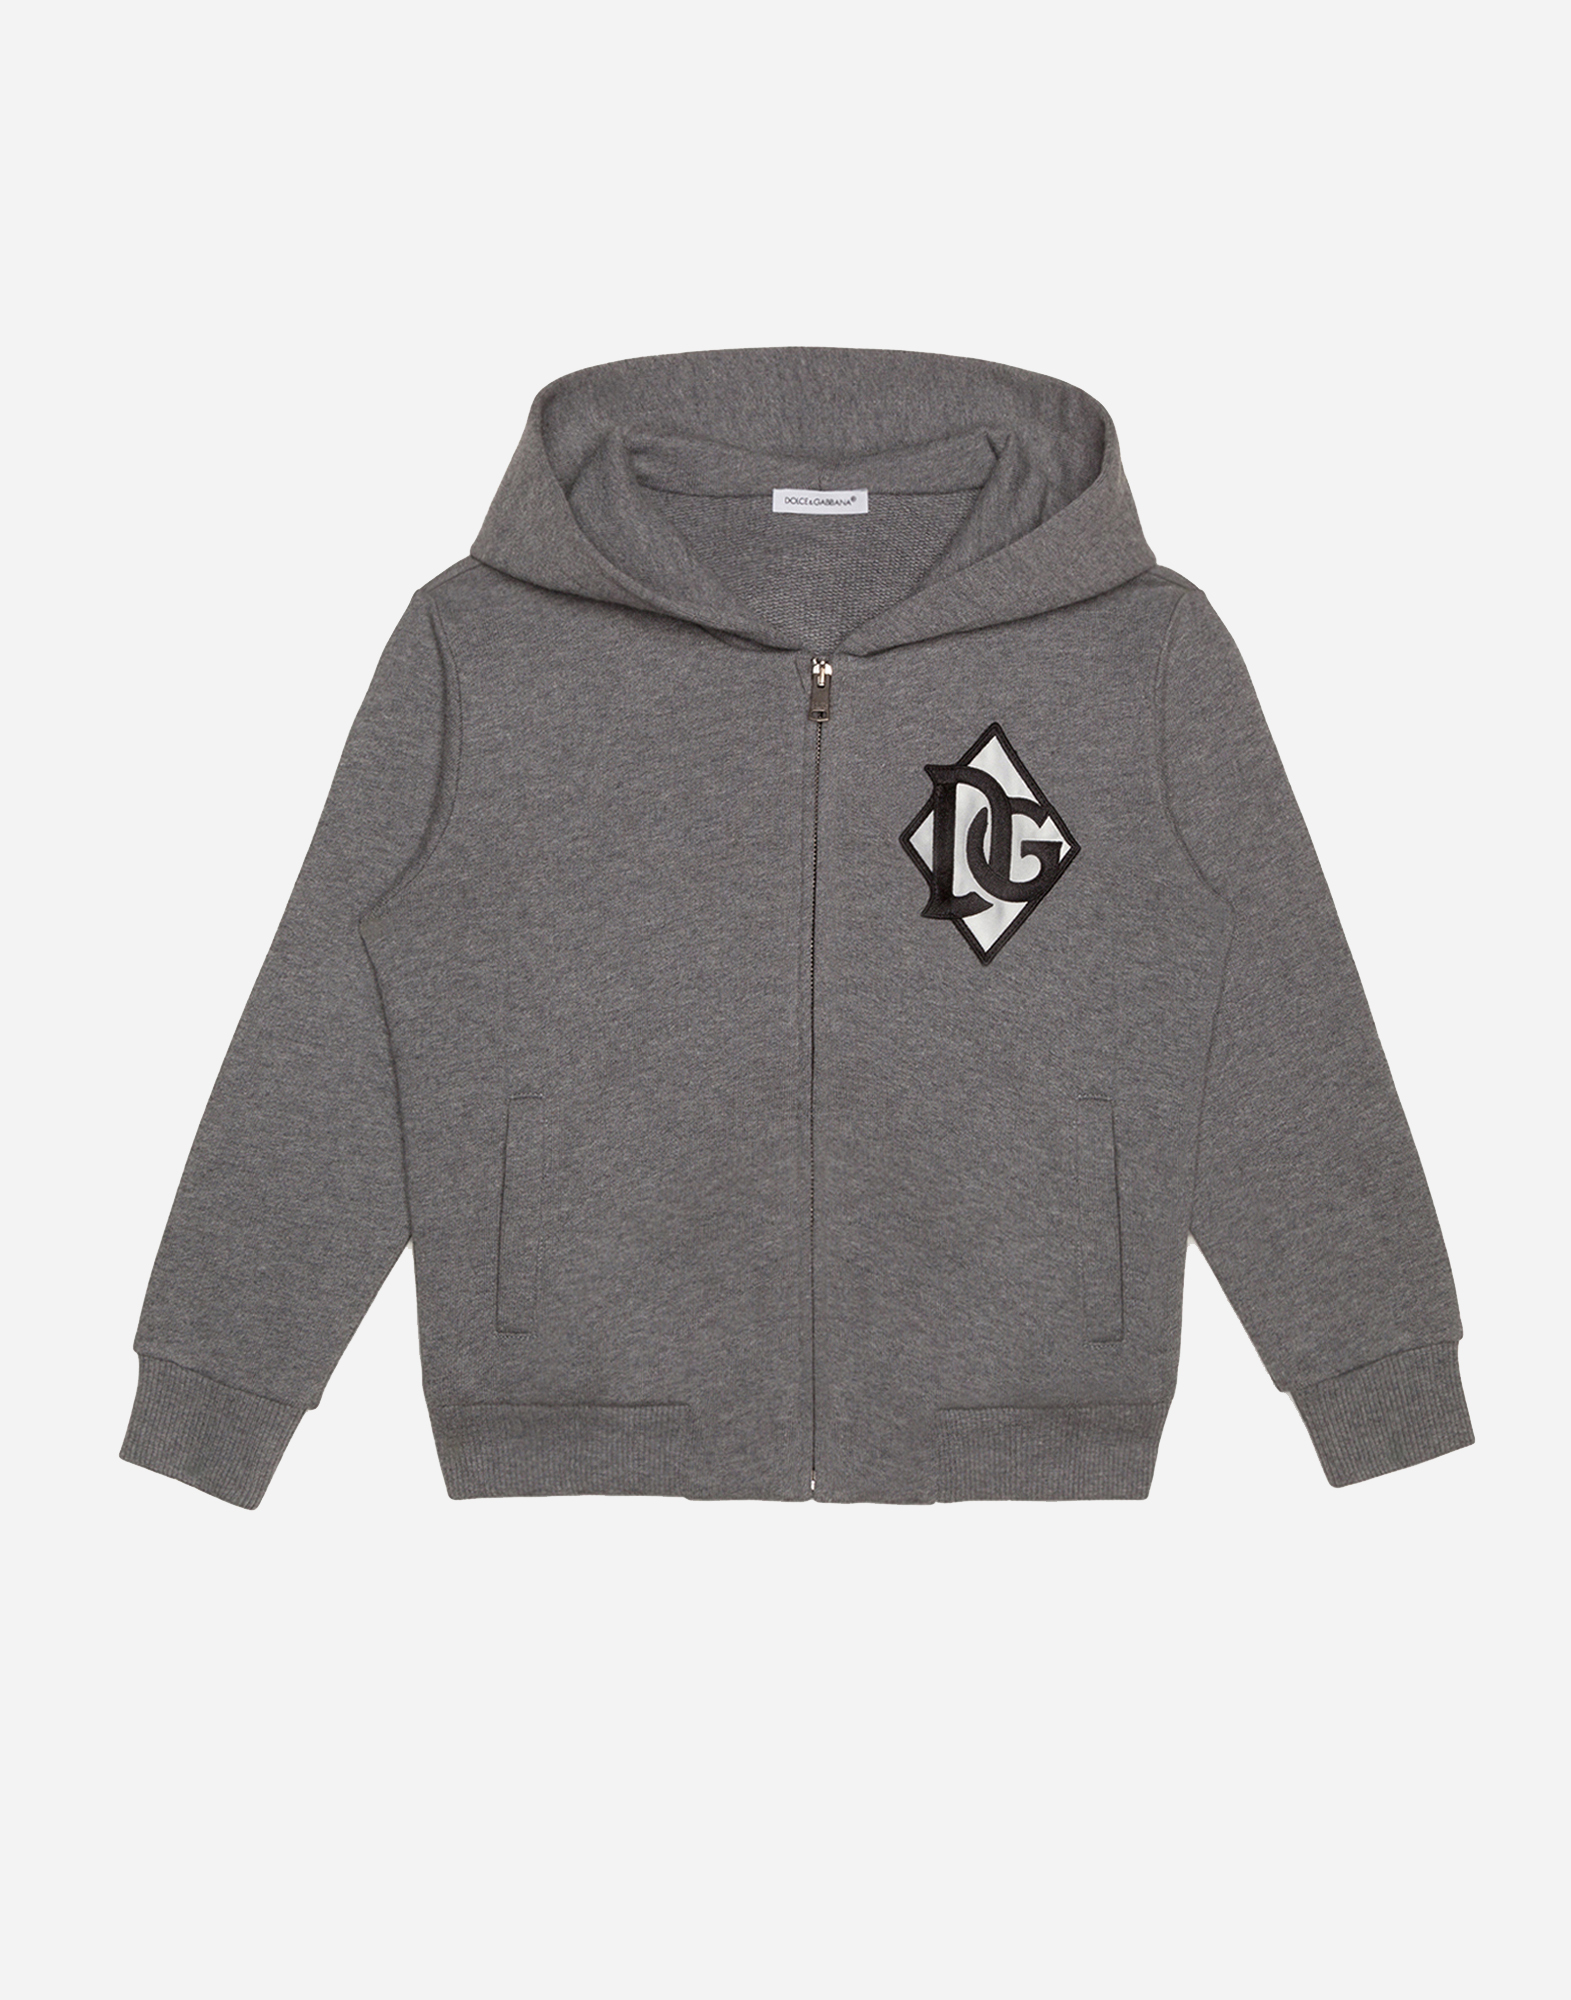 Jersey hoodie with DG patch